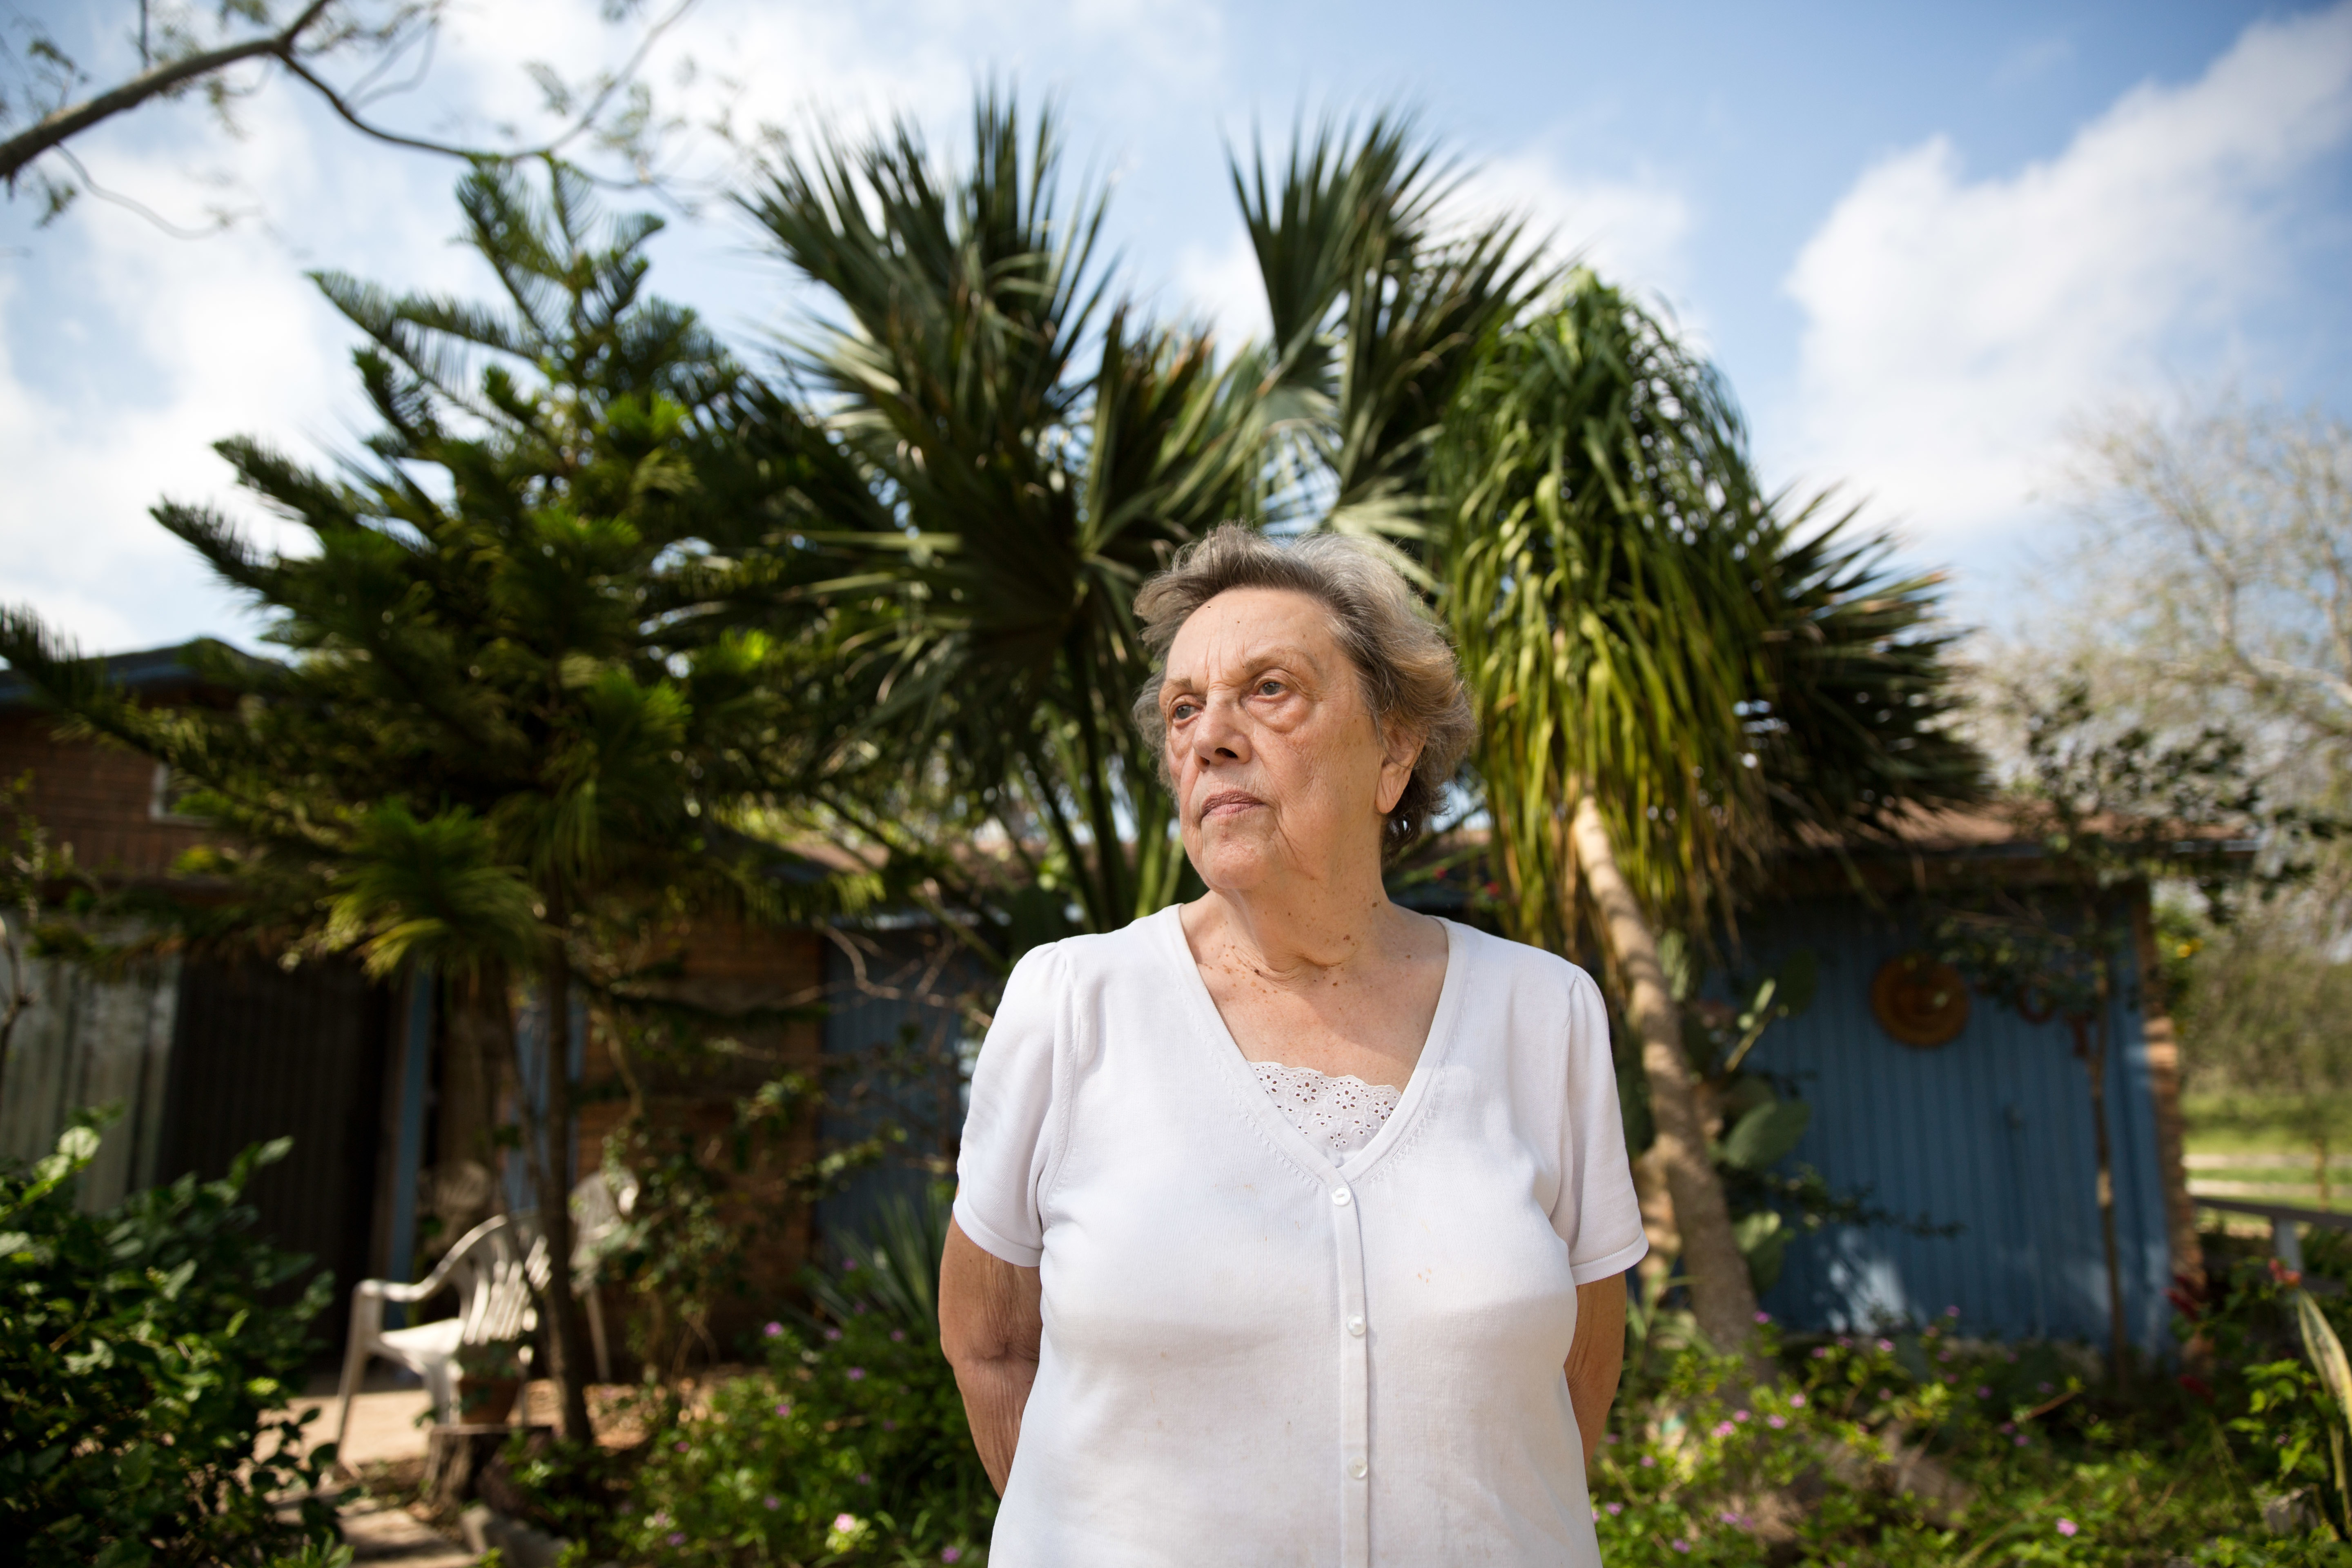 Pamela Taylor has lived in a house on the Texas-Mexico border since the 1950s. It's on American soil, but now sits south of the border fence in an area critics refer to as a 